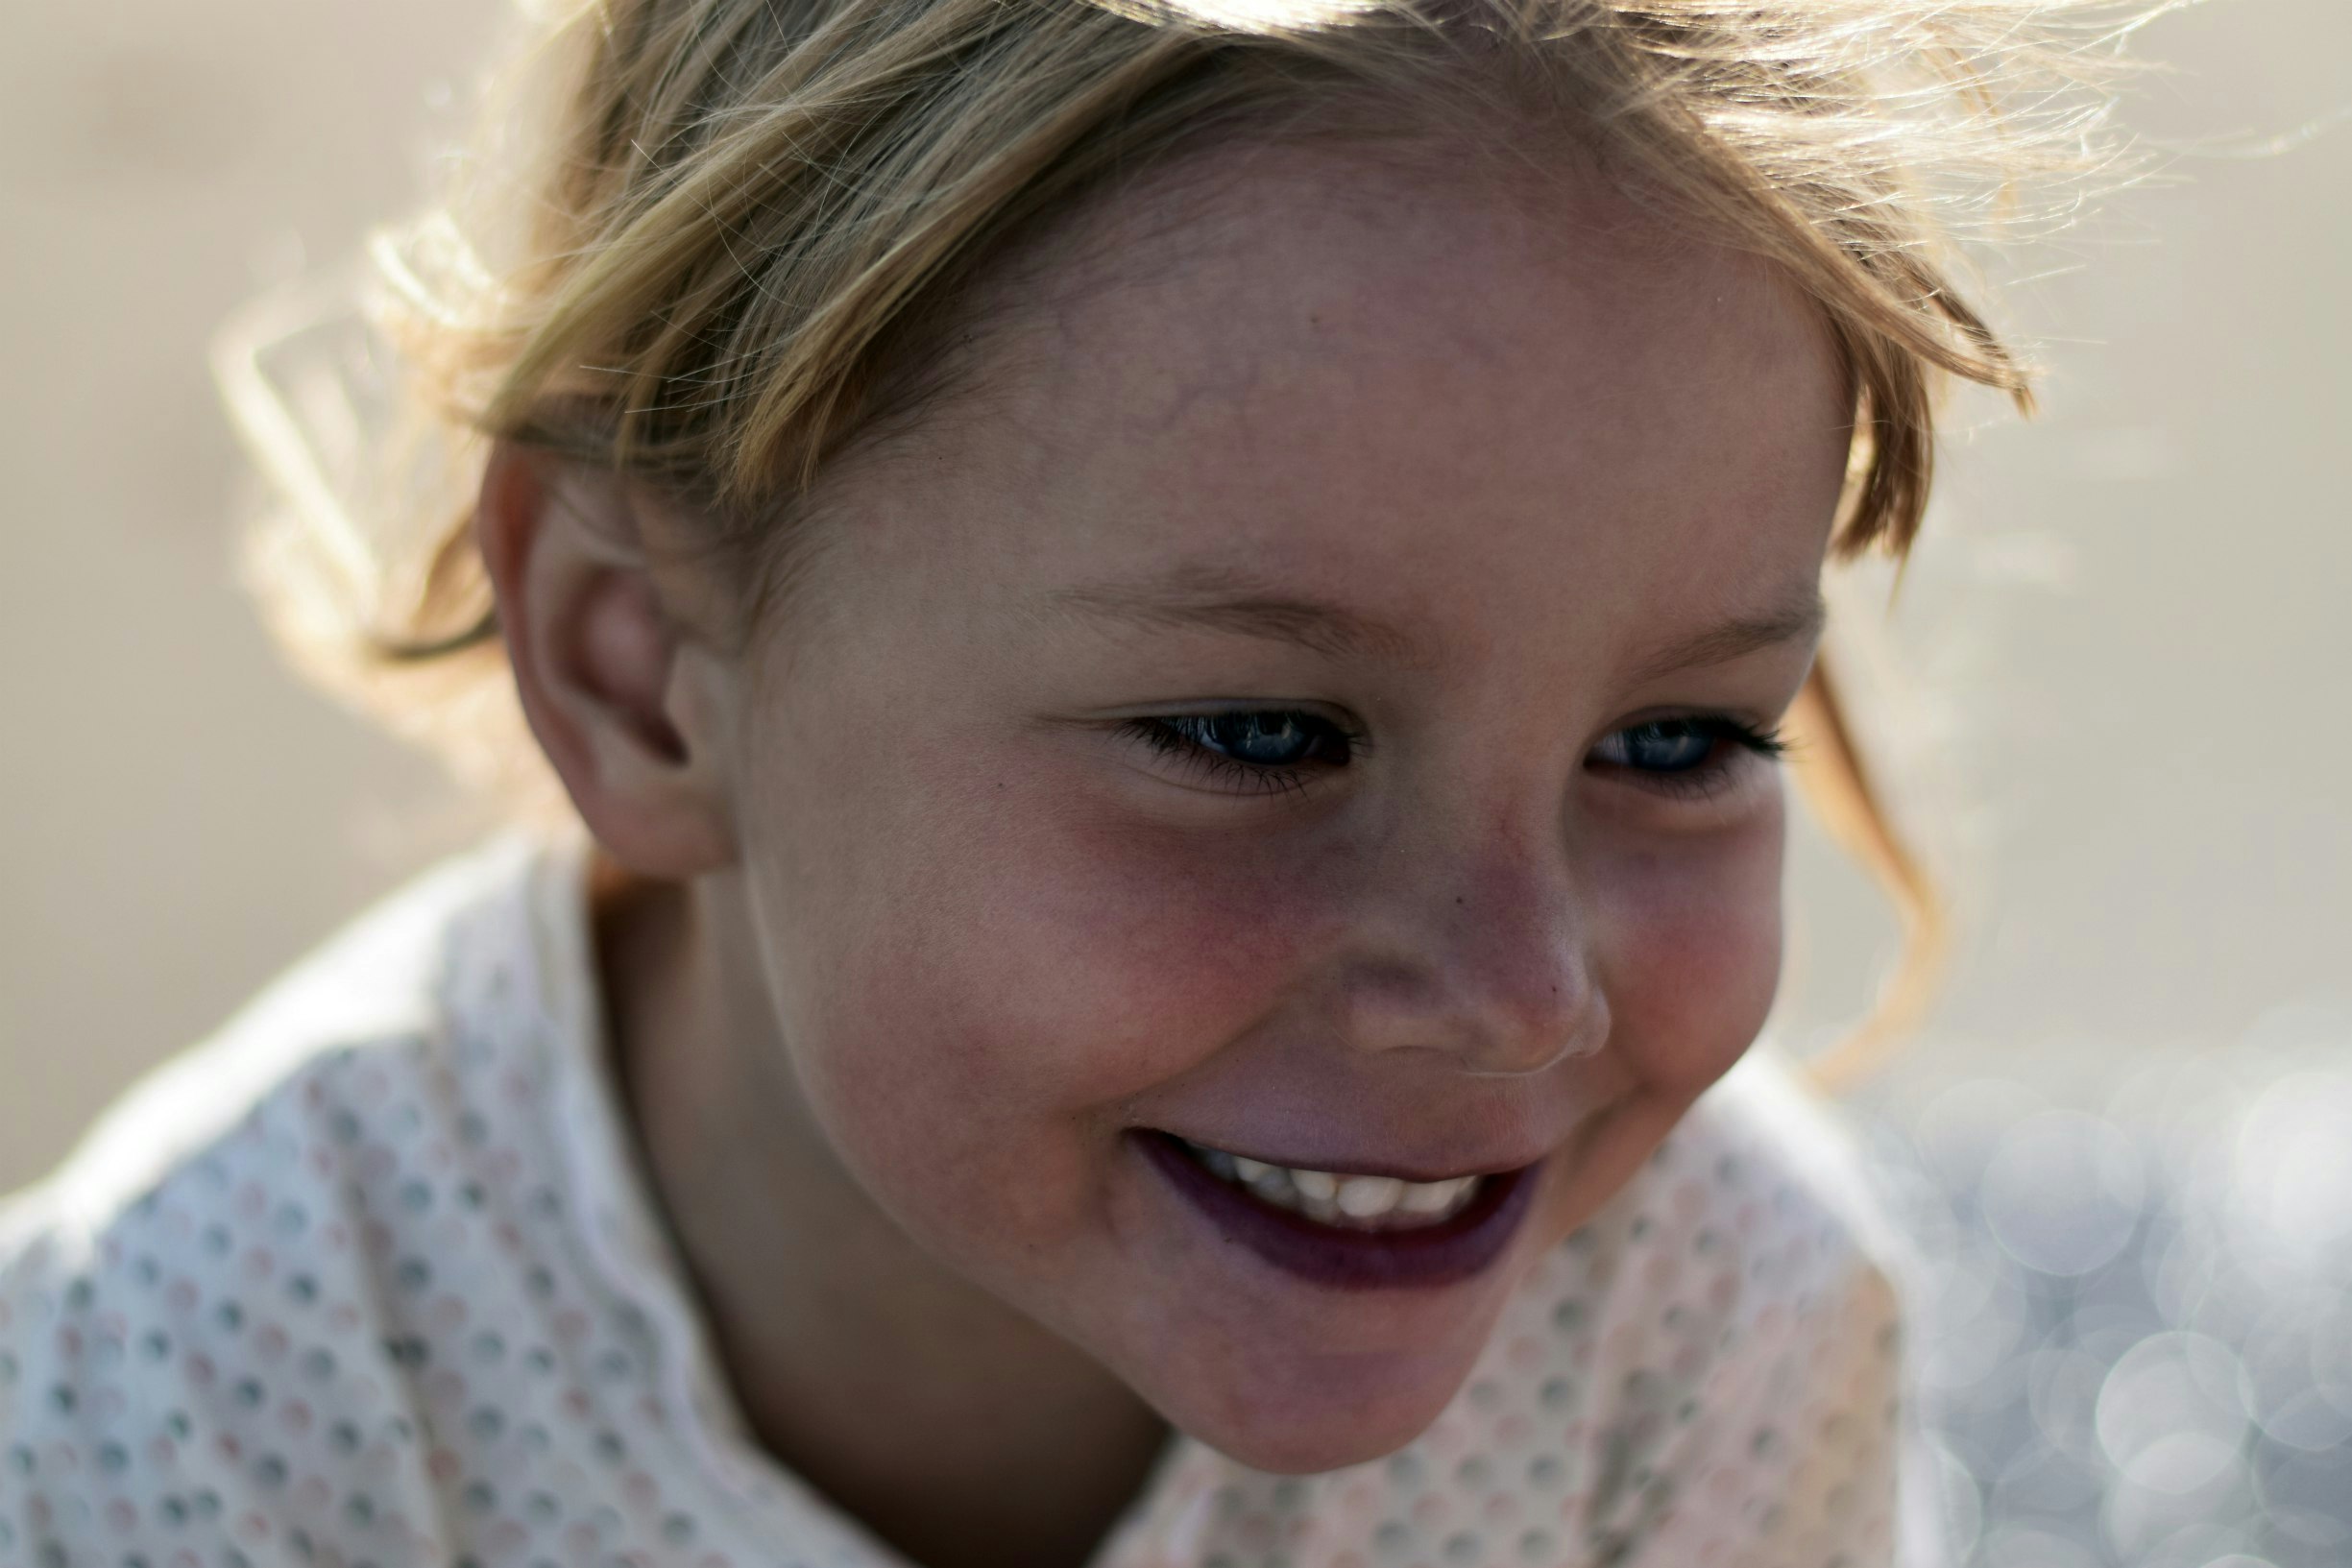 selective focus photo of young smiling girl